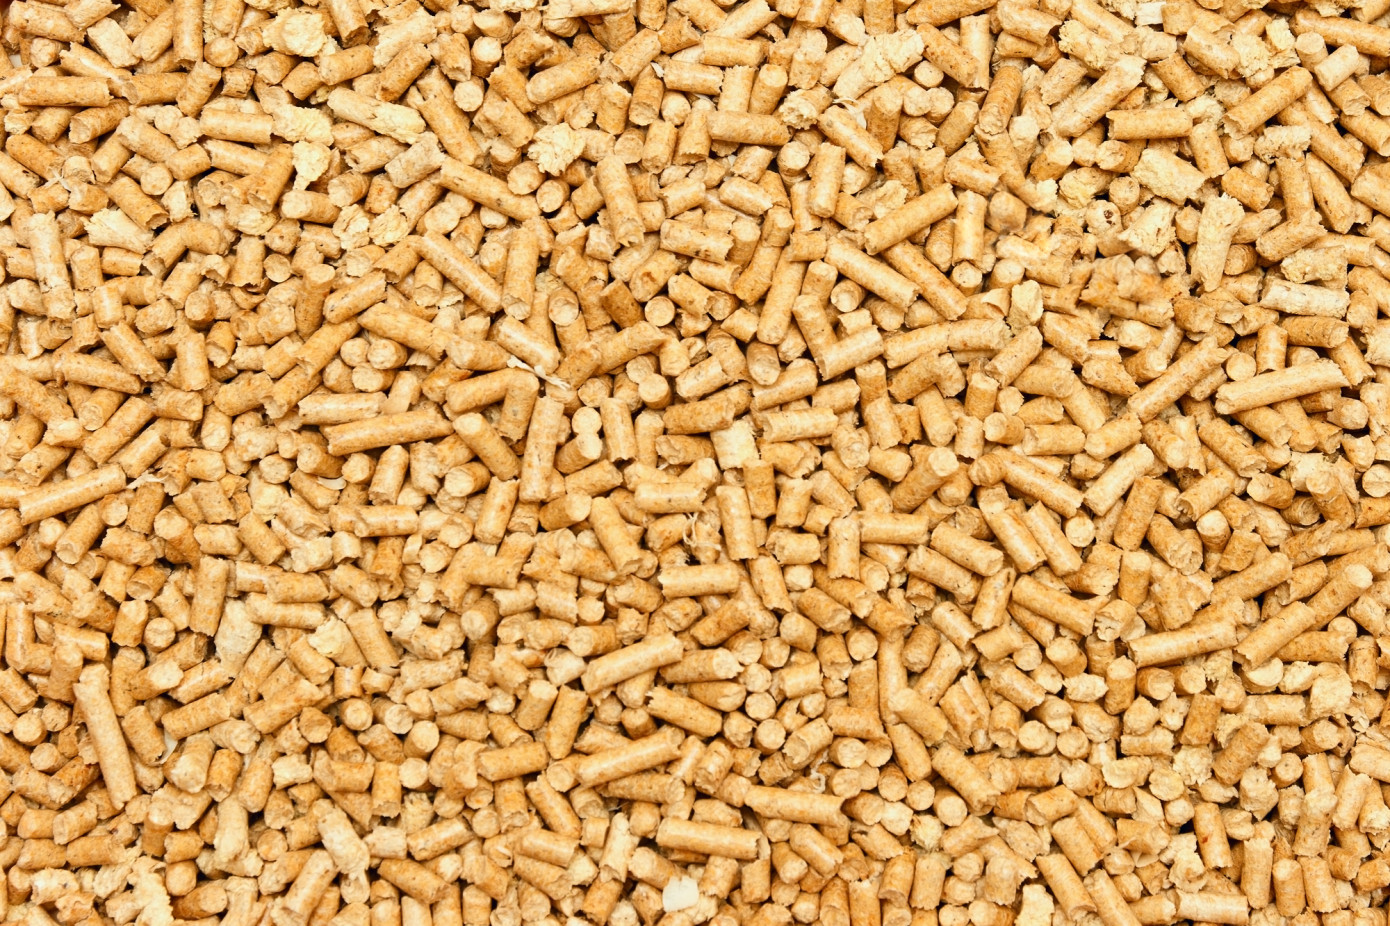 Exports of wood pellets from Russia to South Korea jump 79% in March